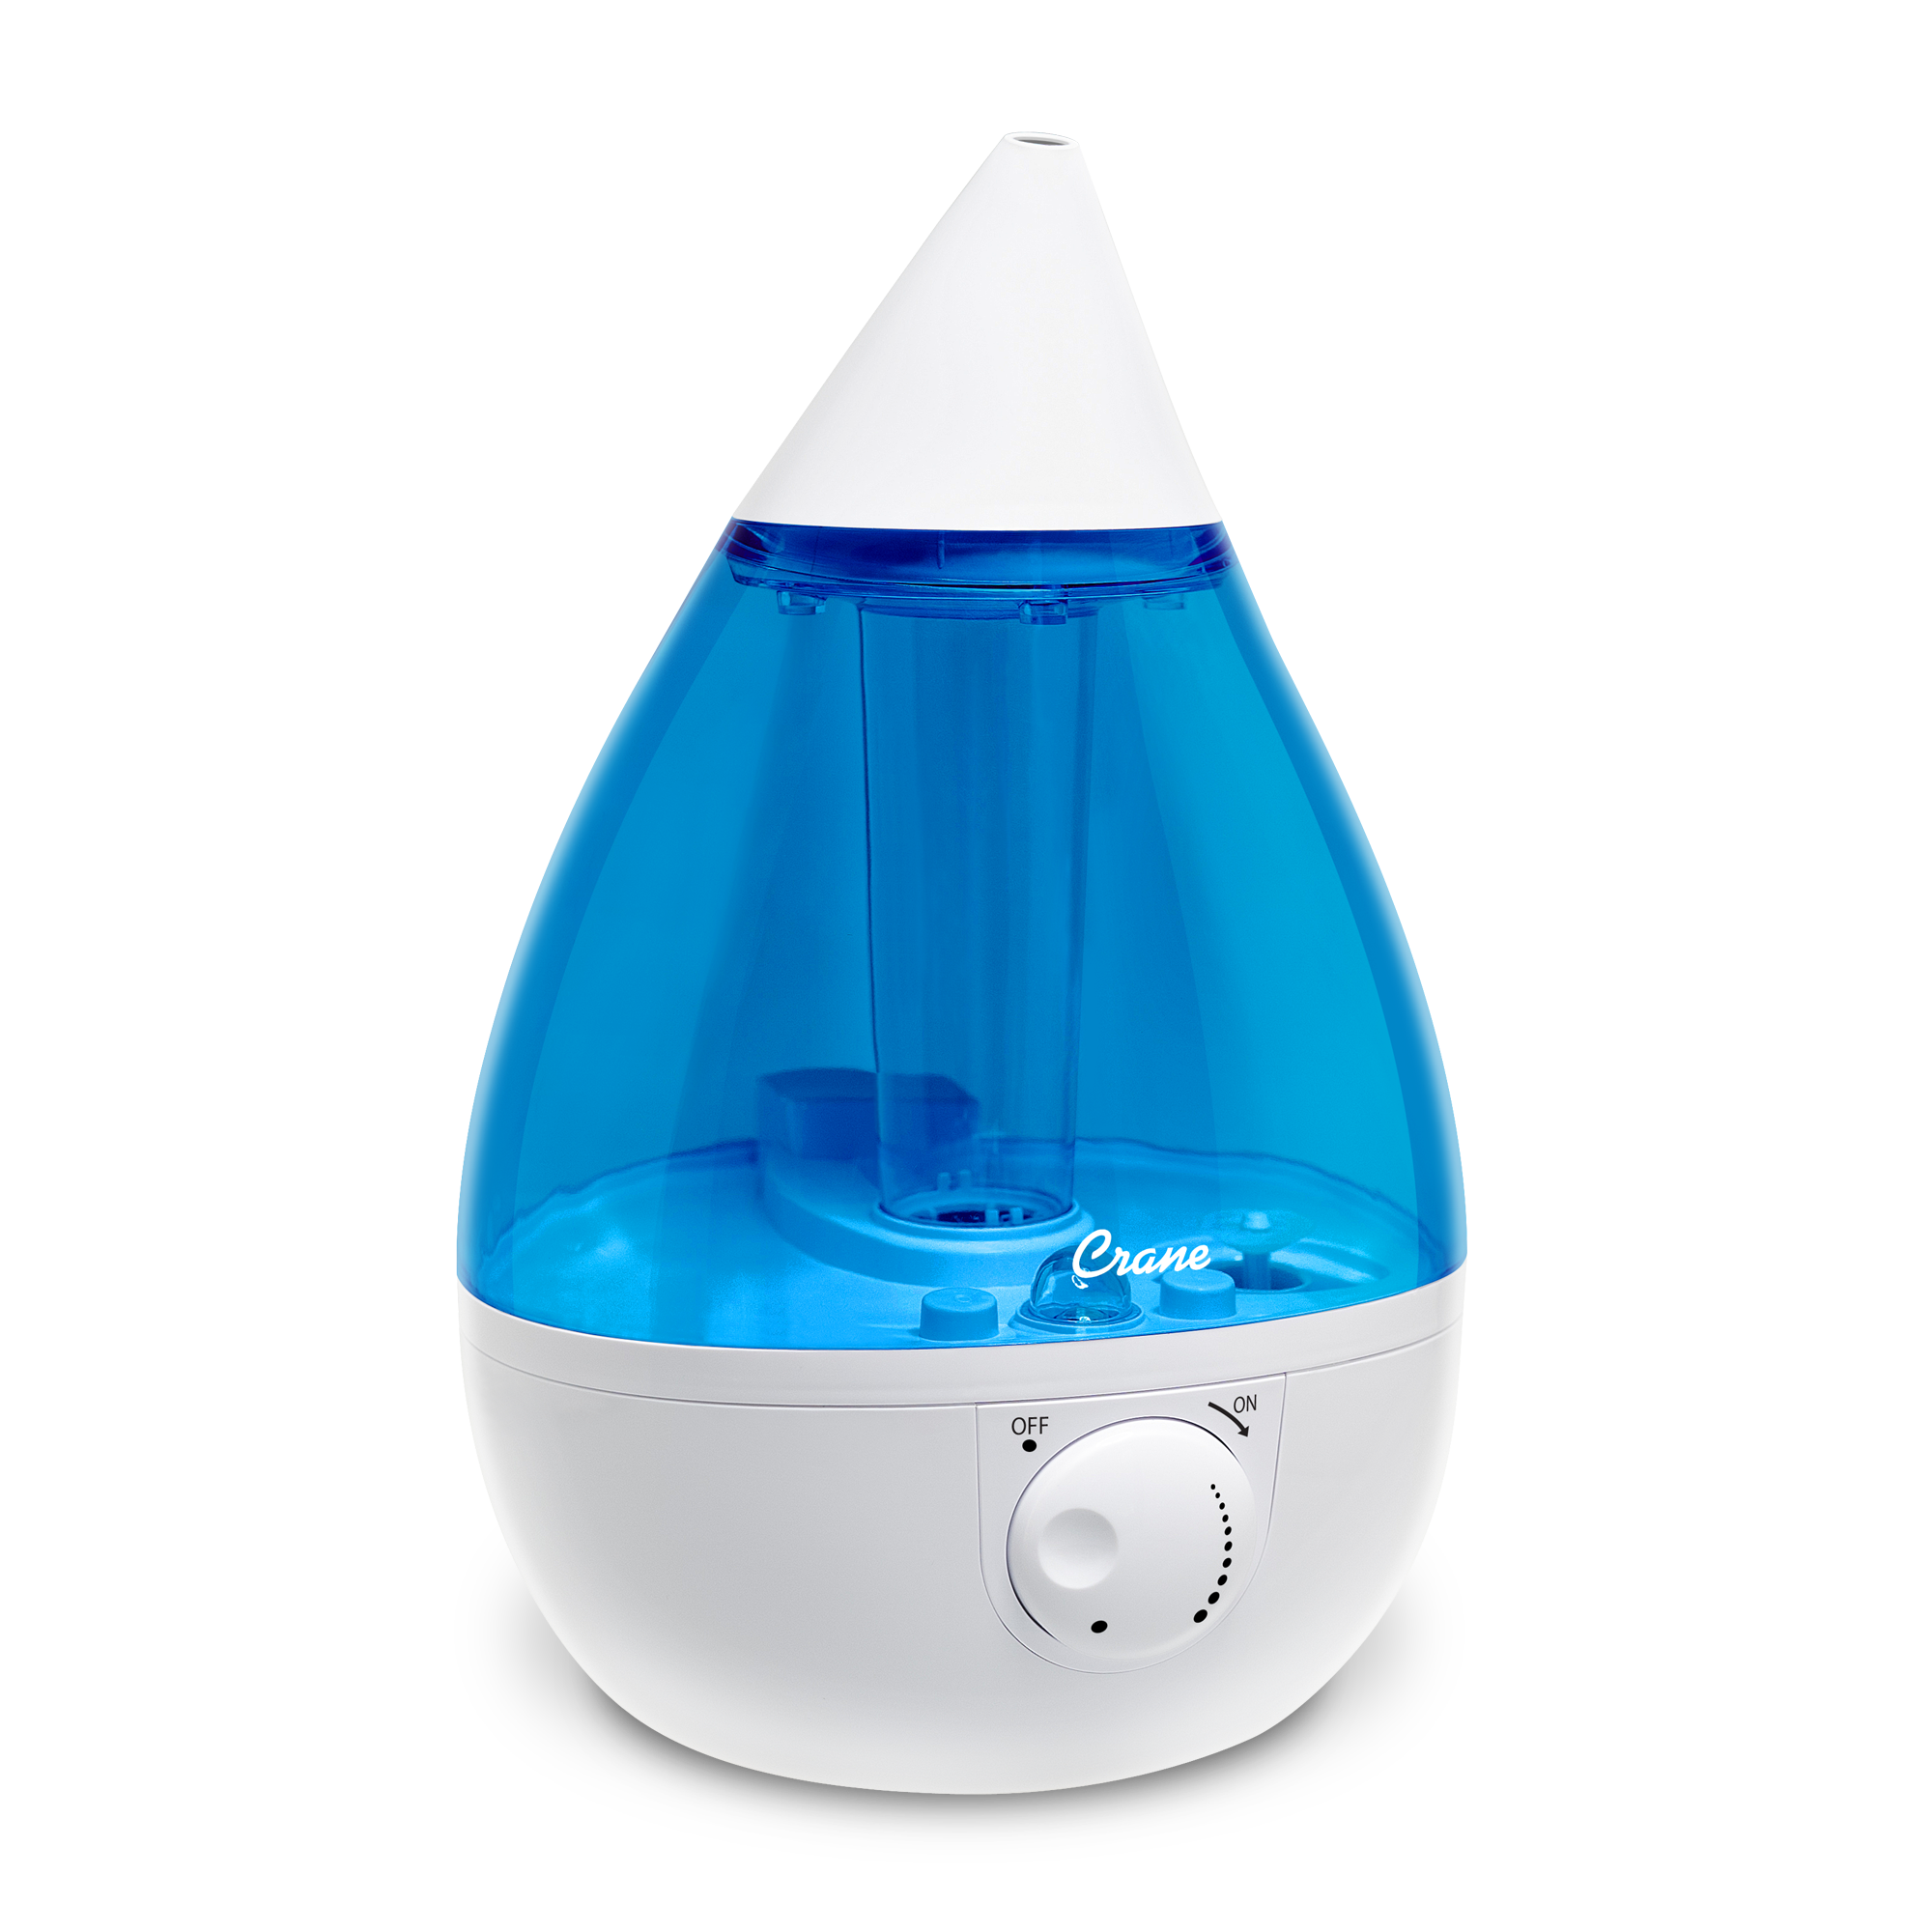 Crane Drop Ultrasonic Cool Mist Humidifier, 1.0 Gallon, 24 Hour Run Time, Whisper Quiet, 500 Sq. Ft. Coverage, Blue/White - image 1 of 10